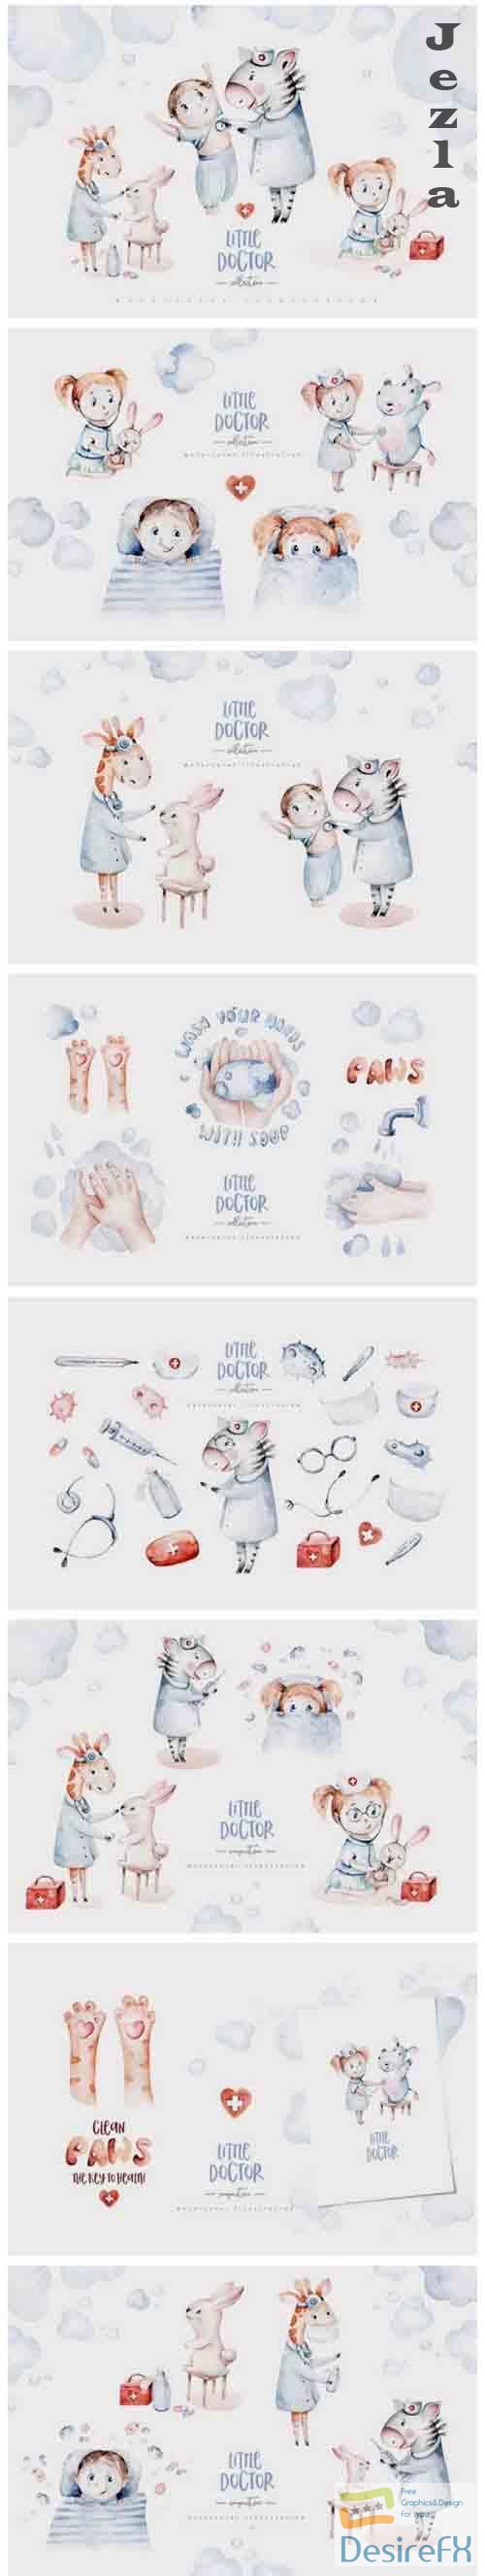 Little doctor cute collection - 4863164